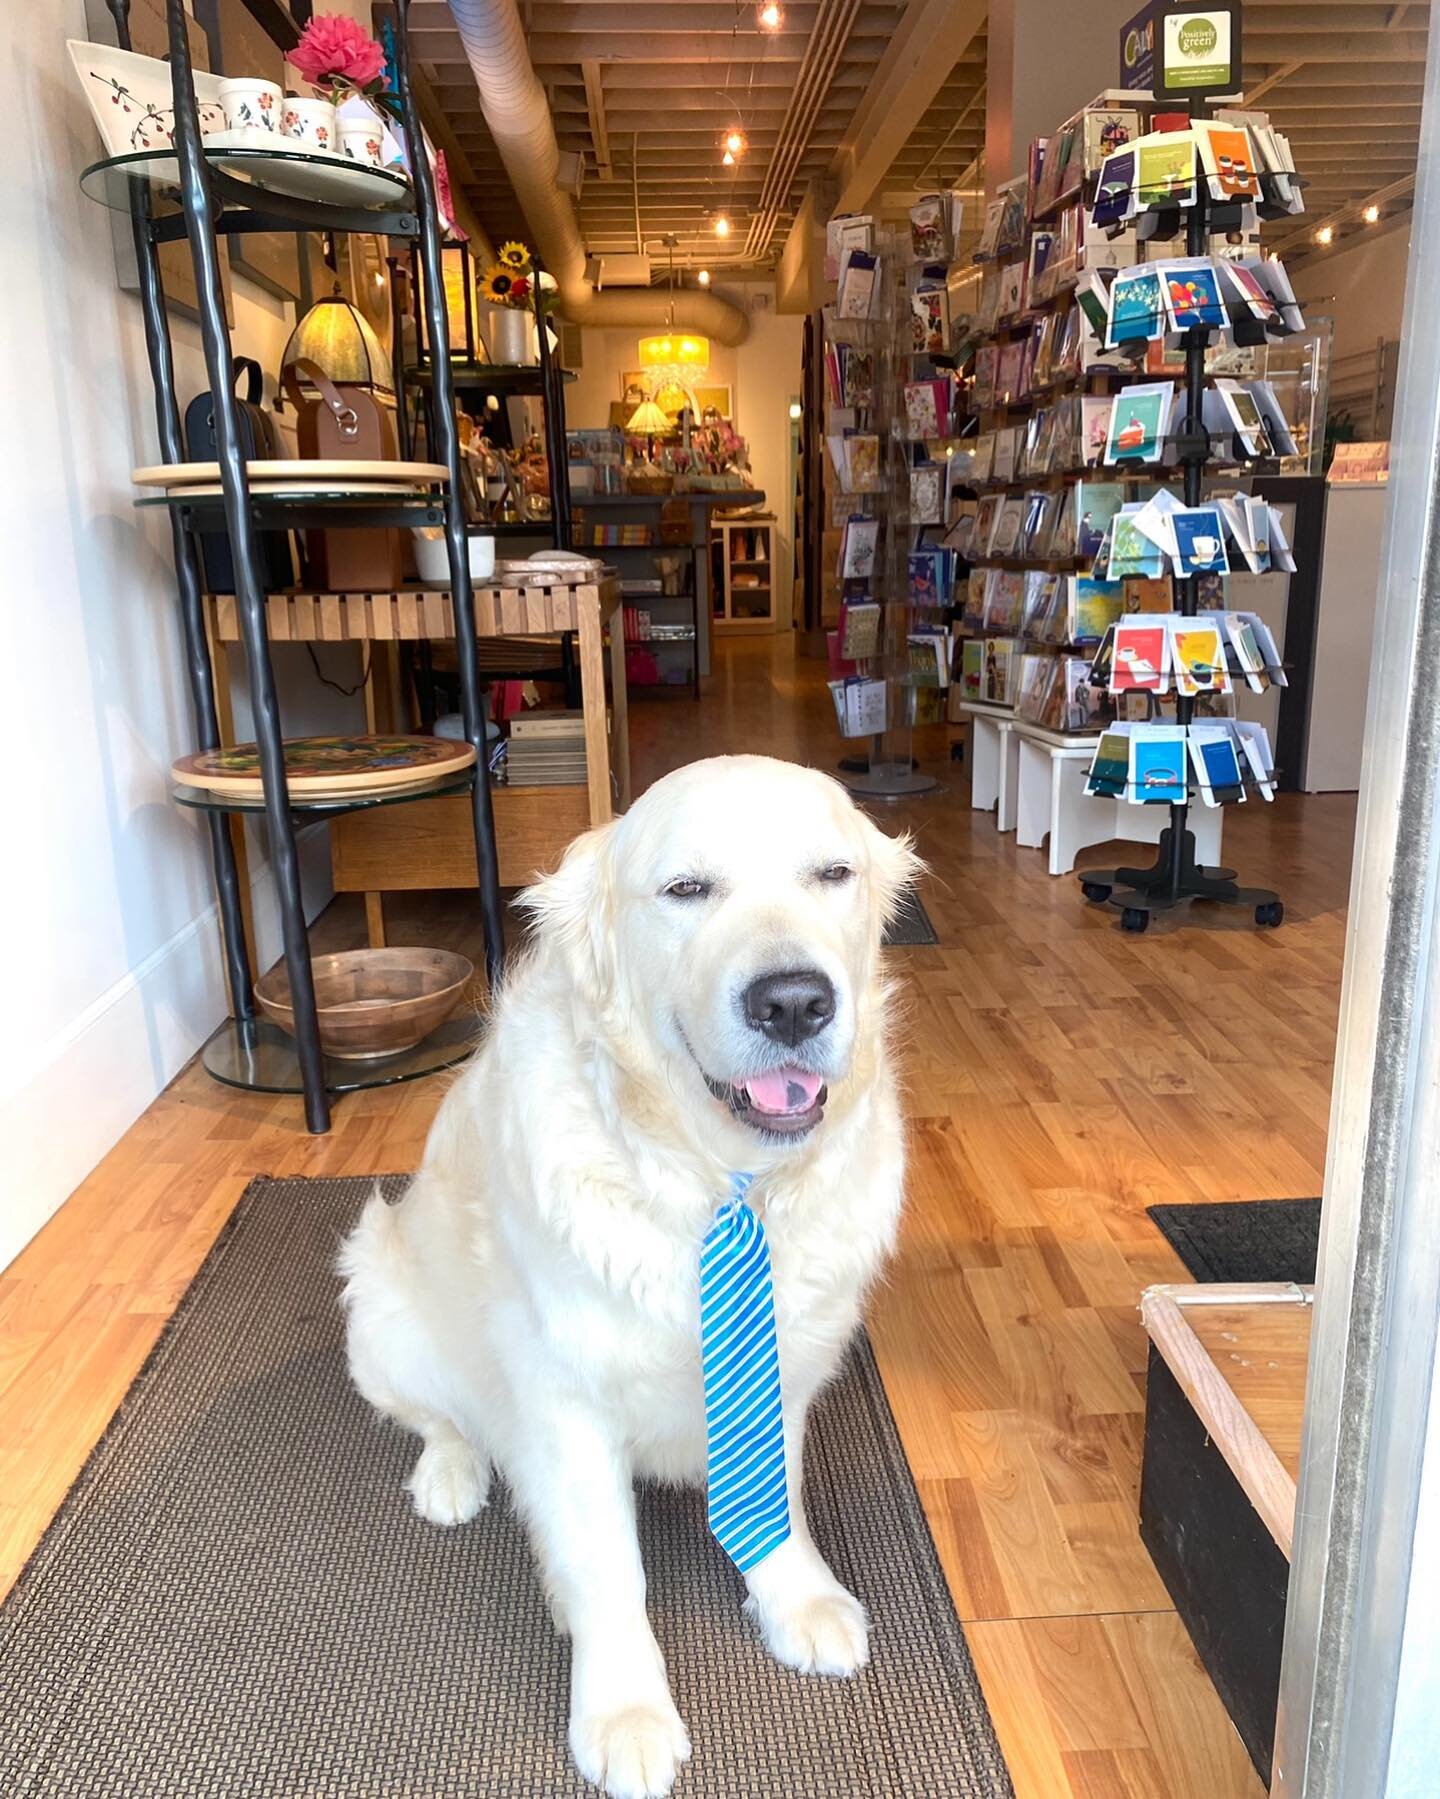 Oliver is ready to wish everyone a Happy Mothers Day! #olivergold #shopdog #goldensrule #mothersday #happymothersday #shopdtw